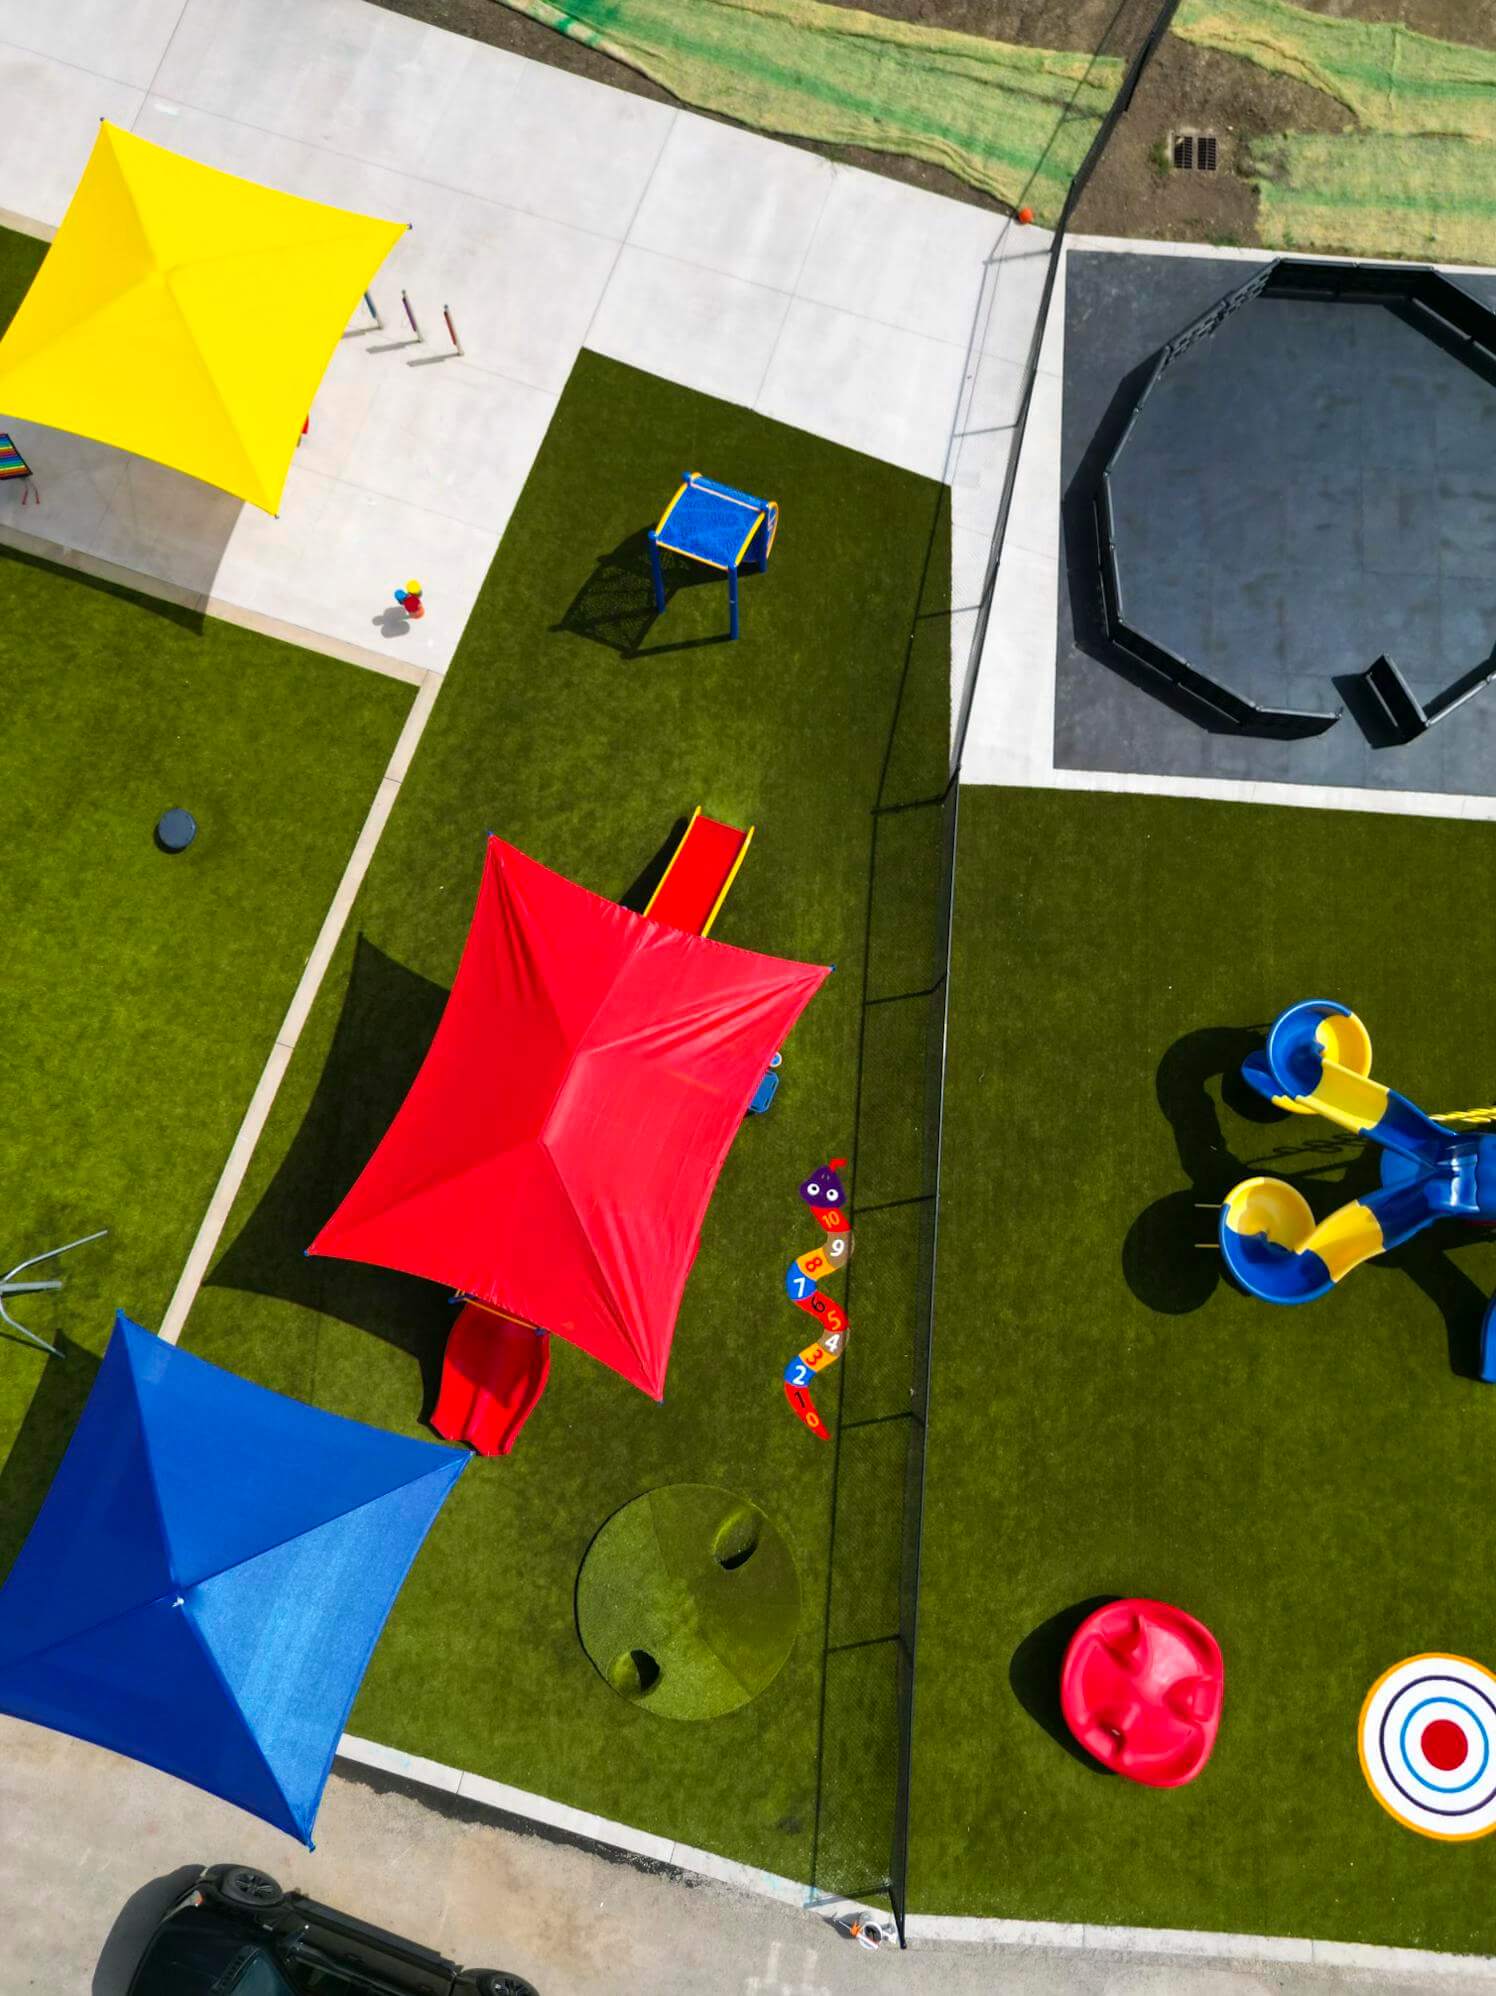 Another aerial perspective of the playground showcasing blue and red sunshades, a climbing structure, and a play area.